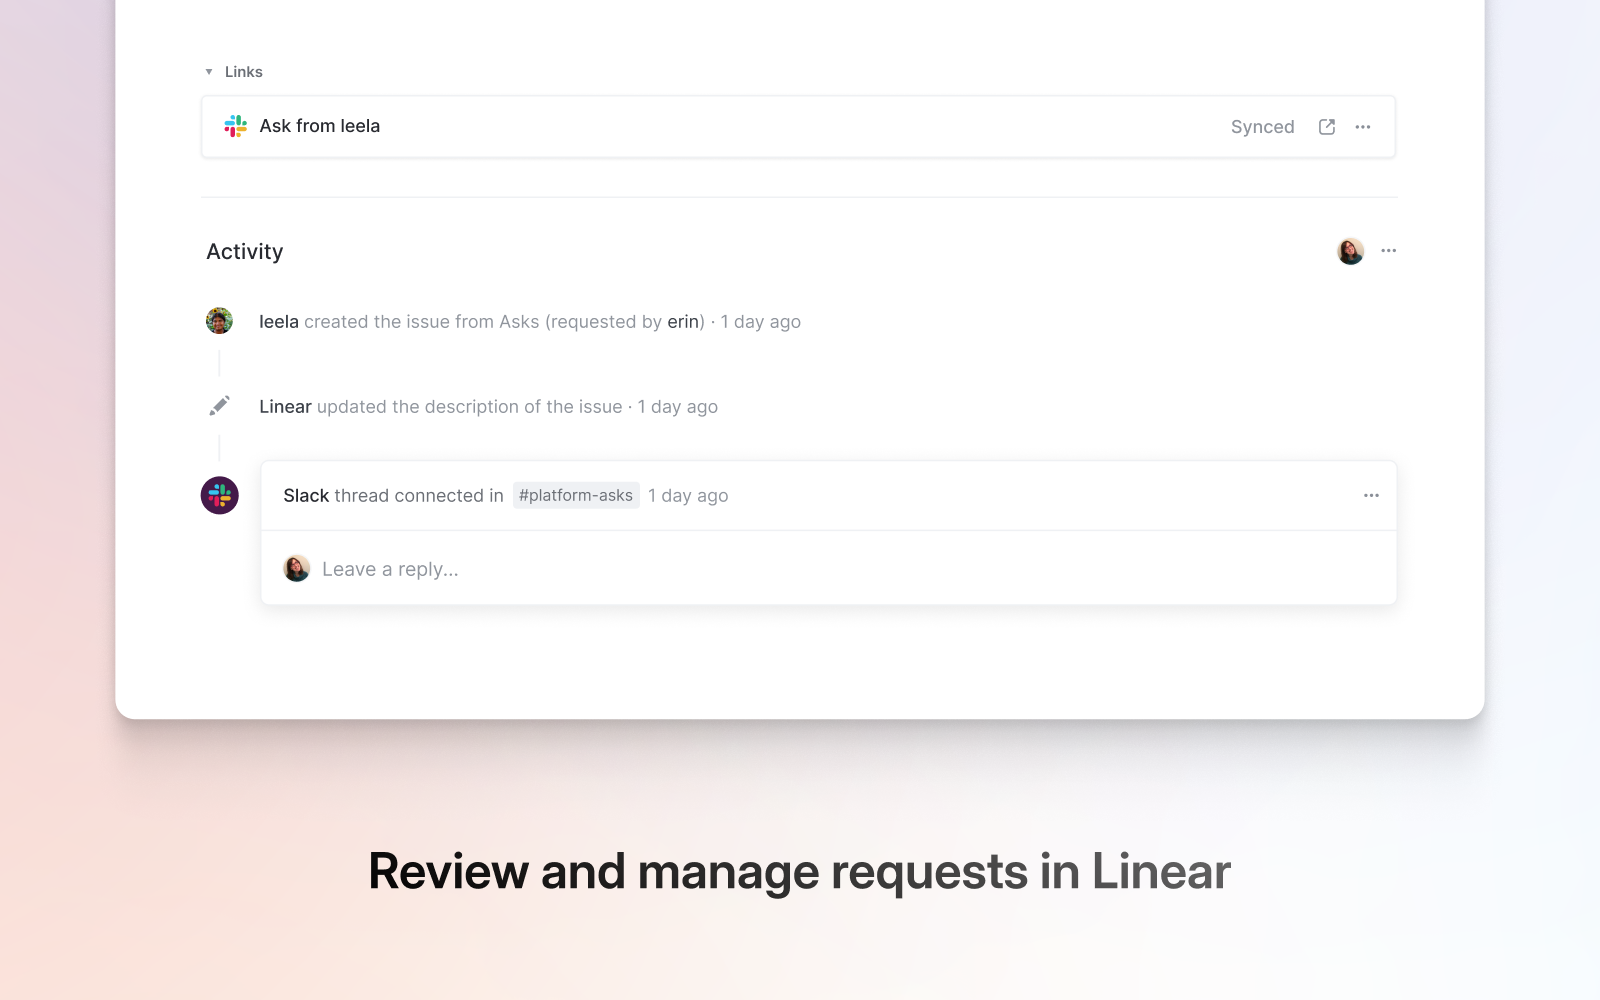 Review and manage requests in Linear